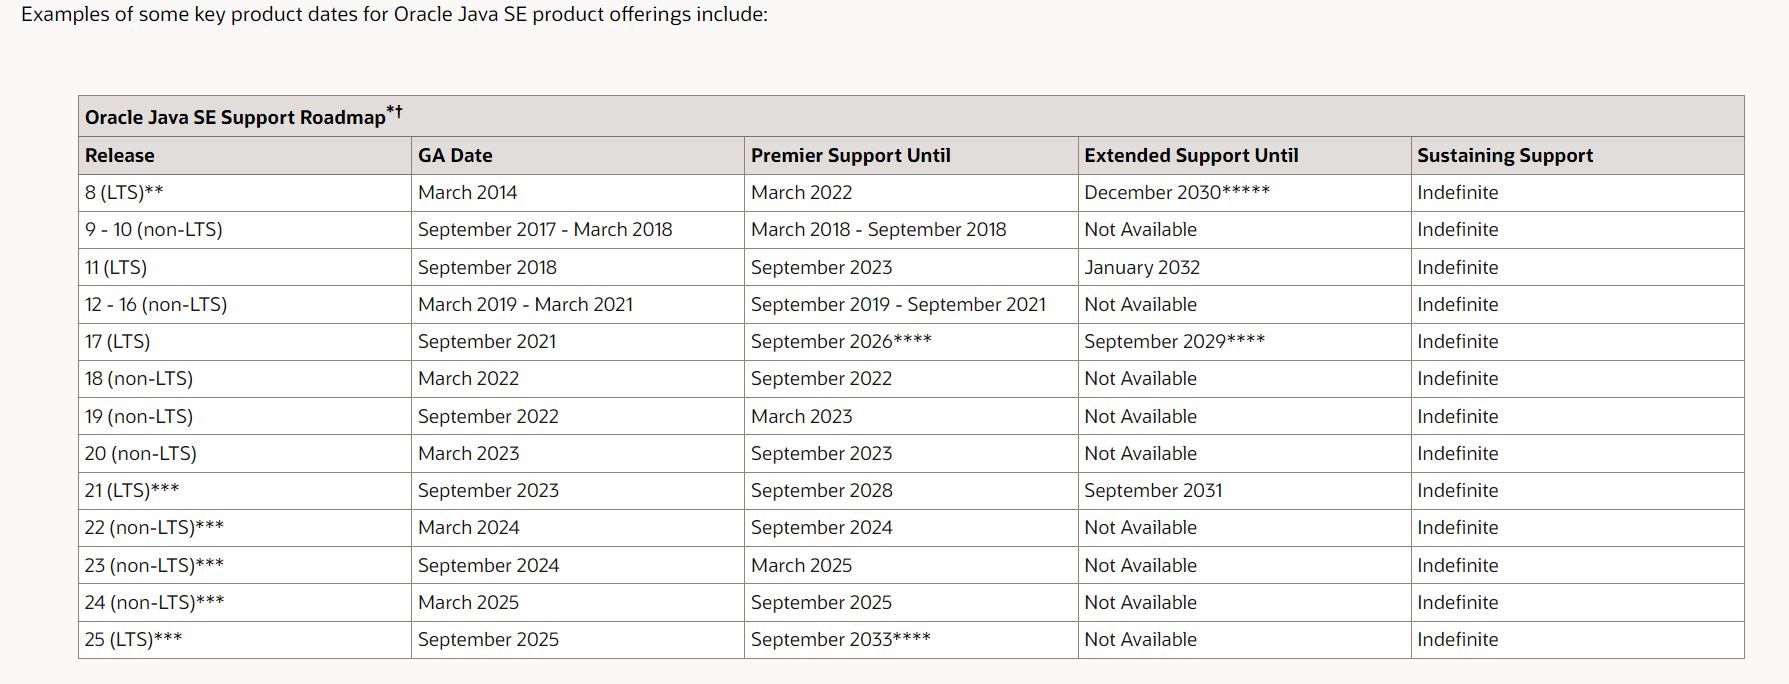 Examples of some key product dates for Oracle Java SE product offerings 